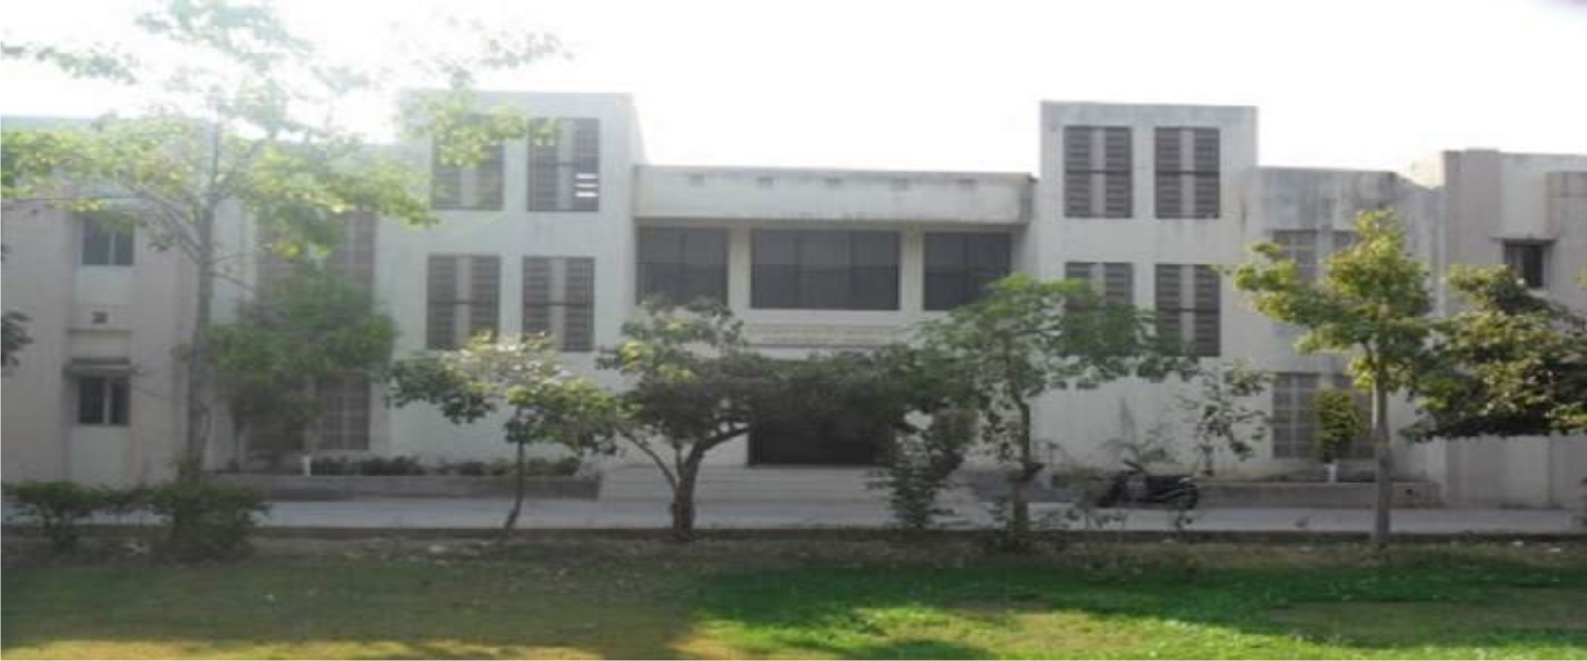 Late Smt. S. G. Patel institute of Physiotherapy